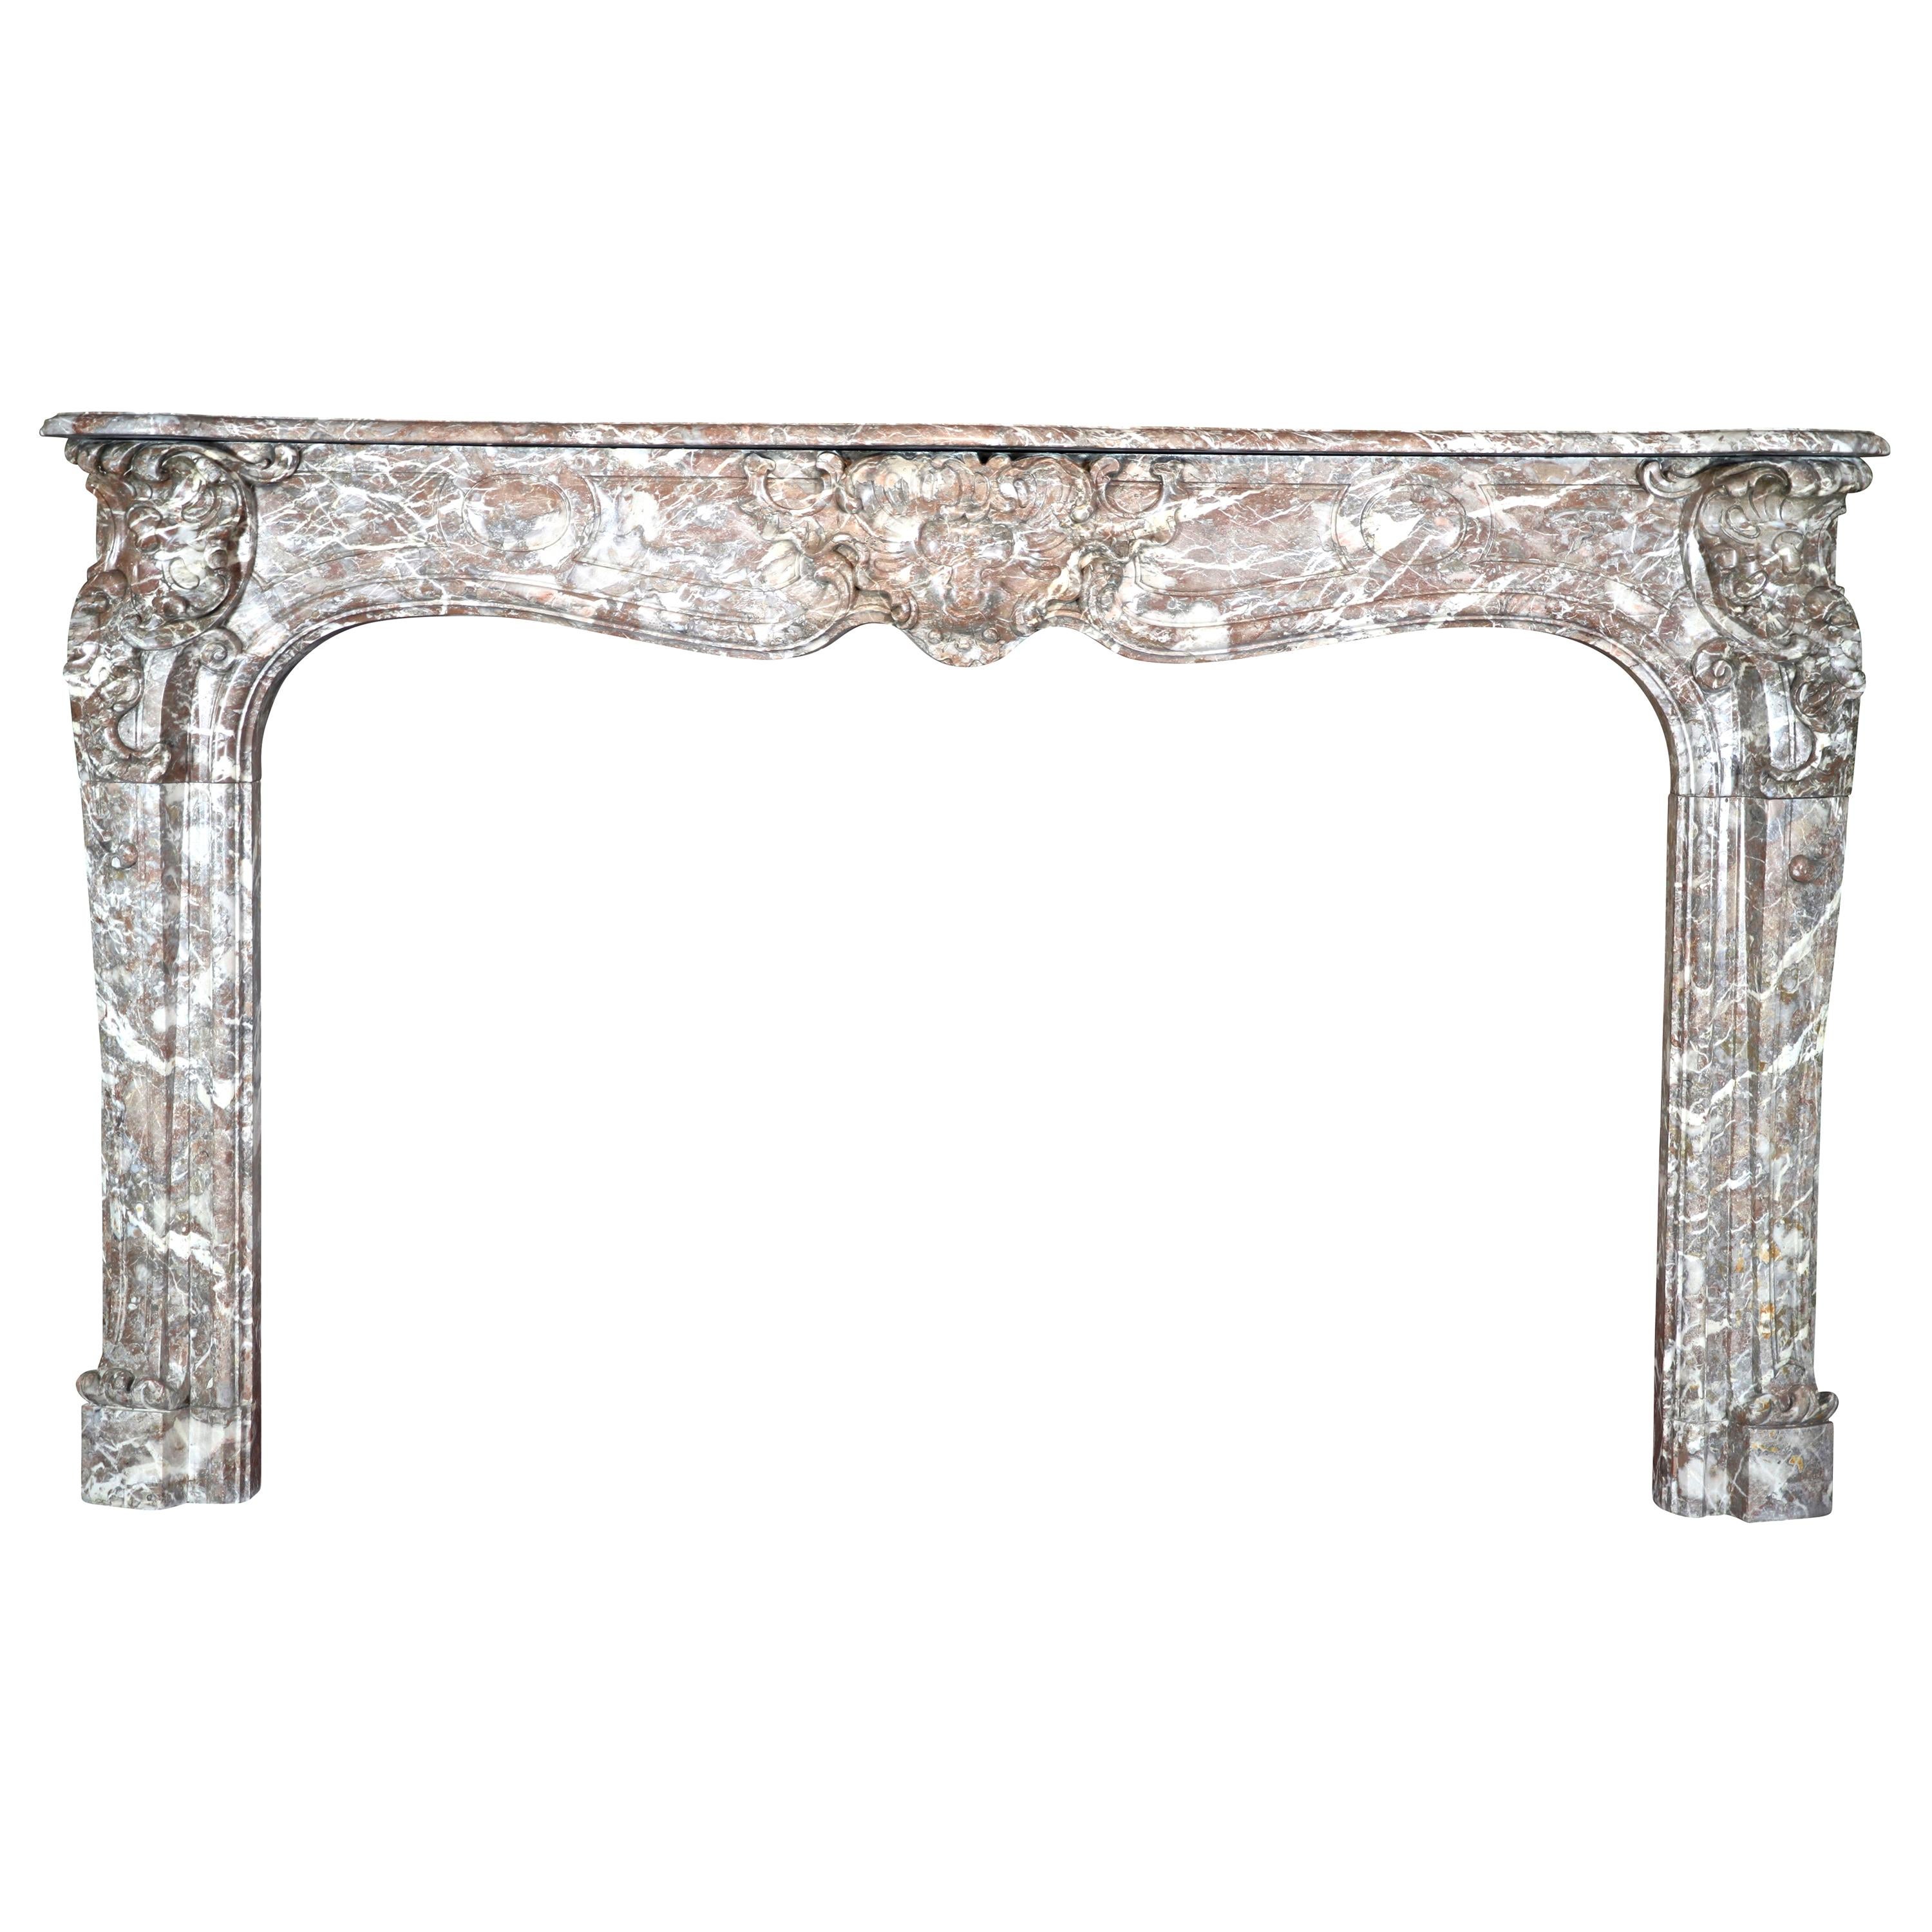 18th Century, Regency Grand Classic Antique Marble Fireplace Surround